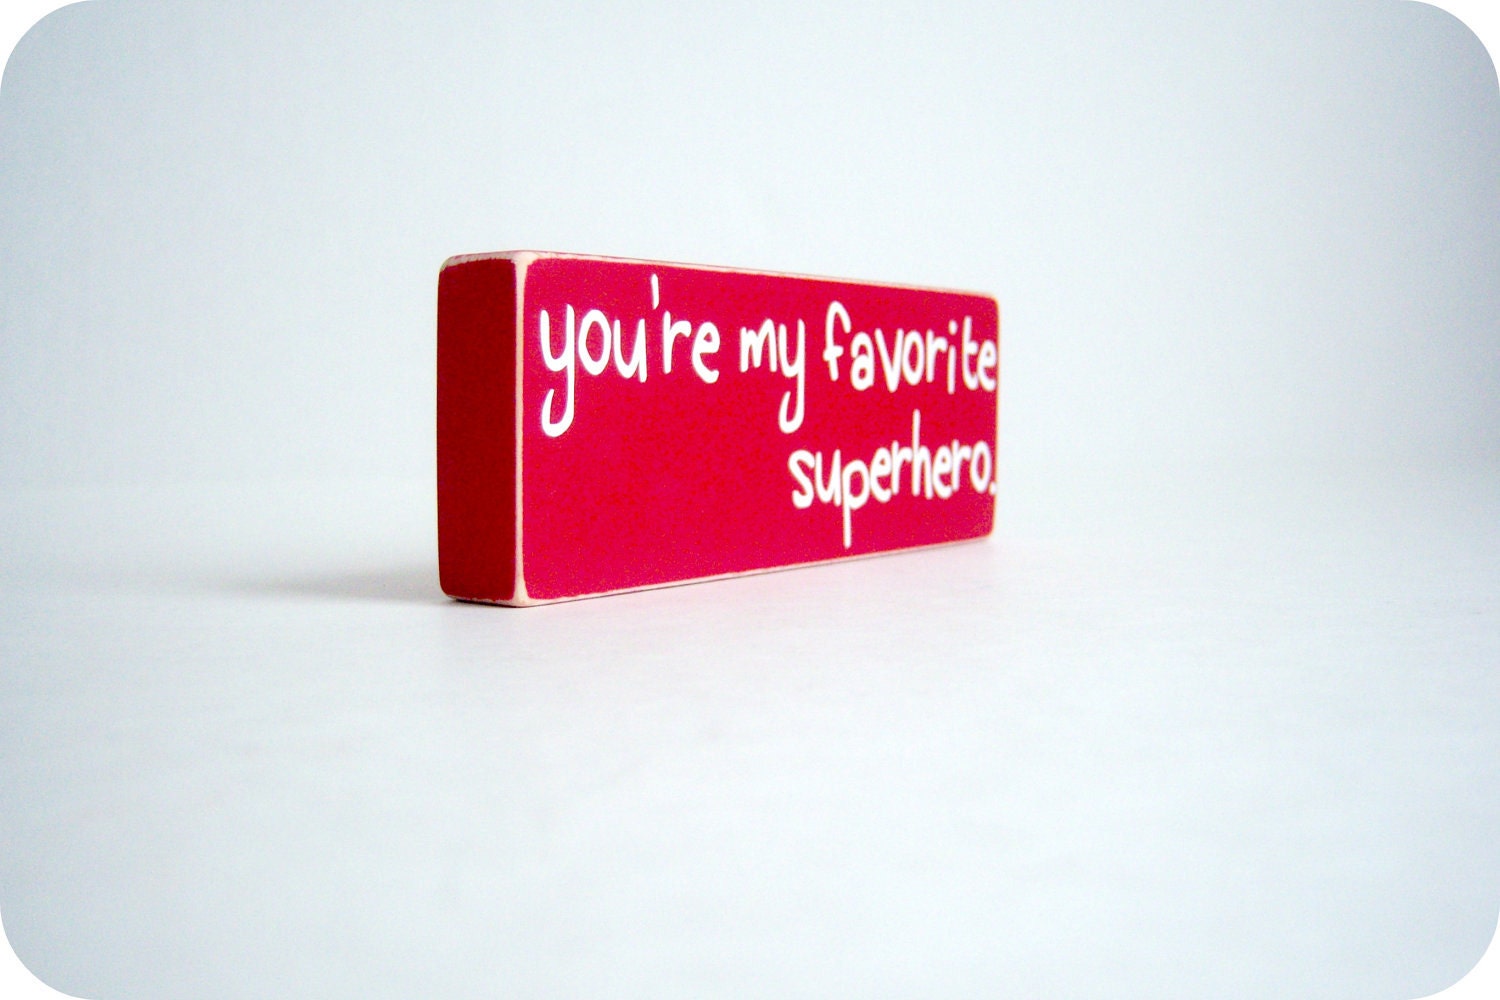 You're My Favorite Superhero. Great Gift for Mother's Day.